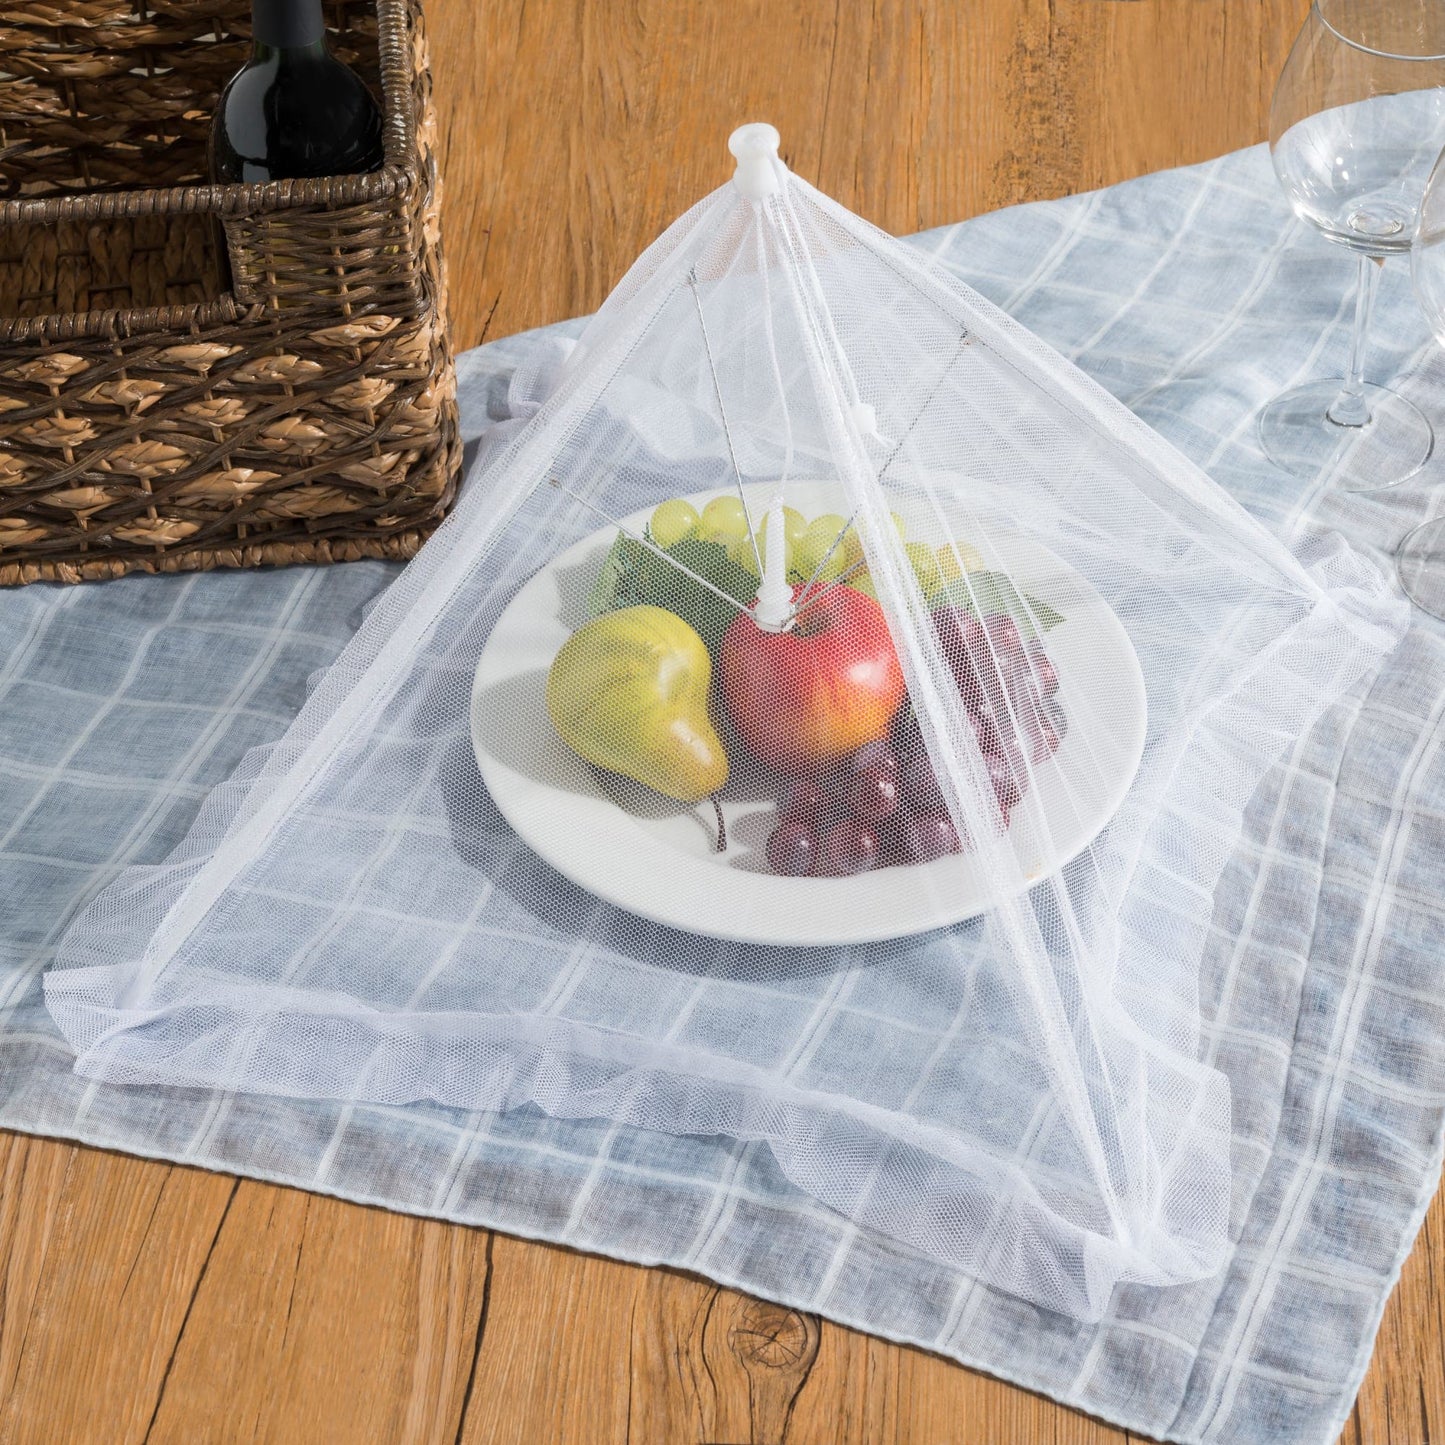 Square Mesh Collapsible Food Plate Cover, White